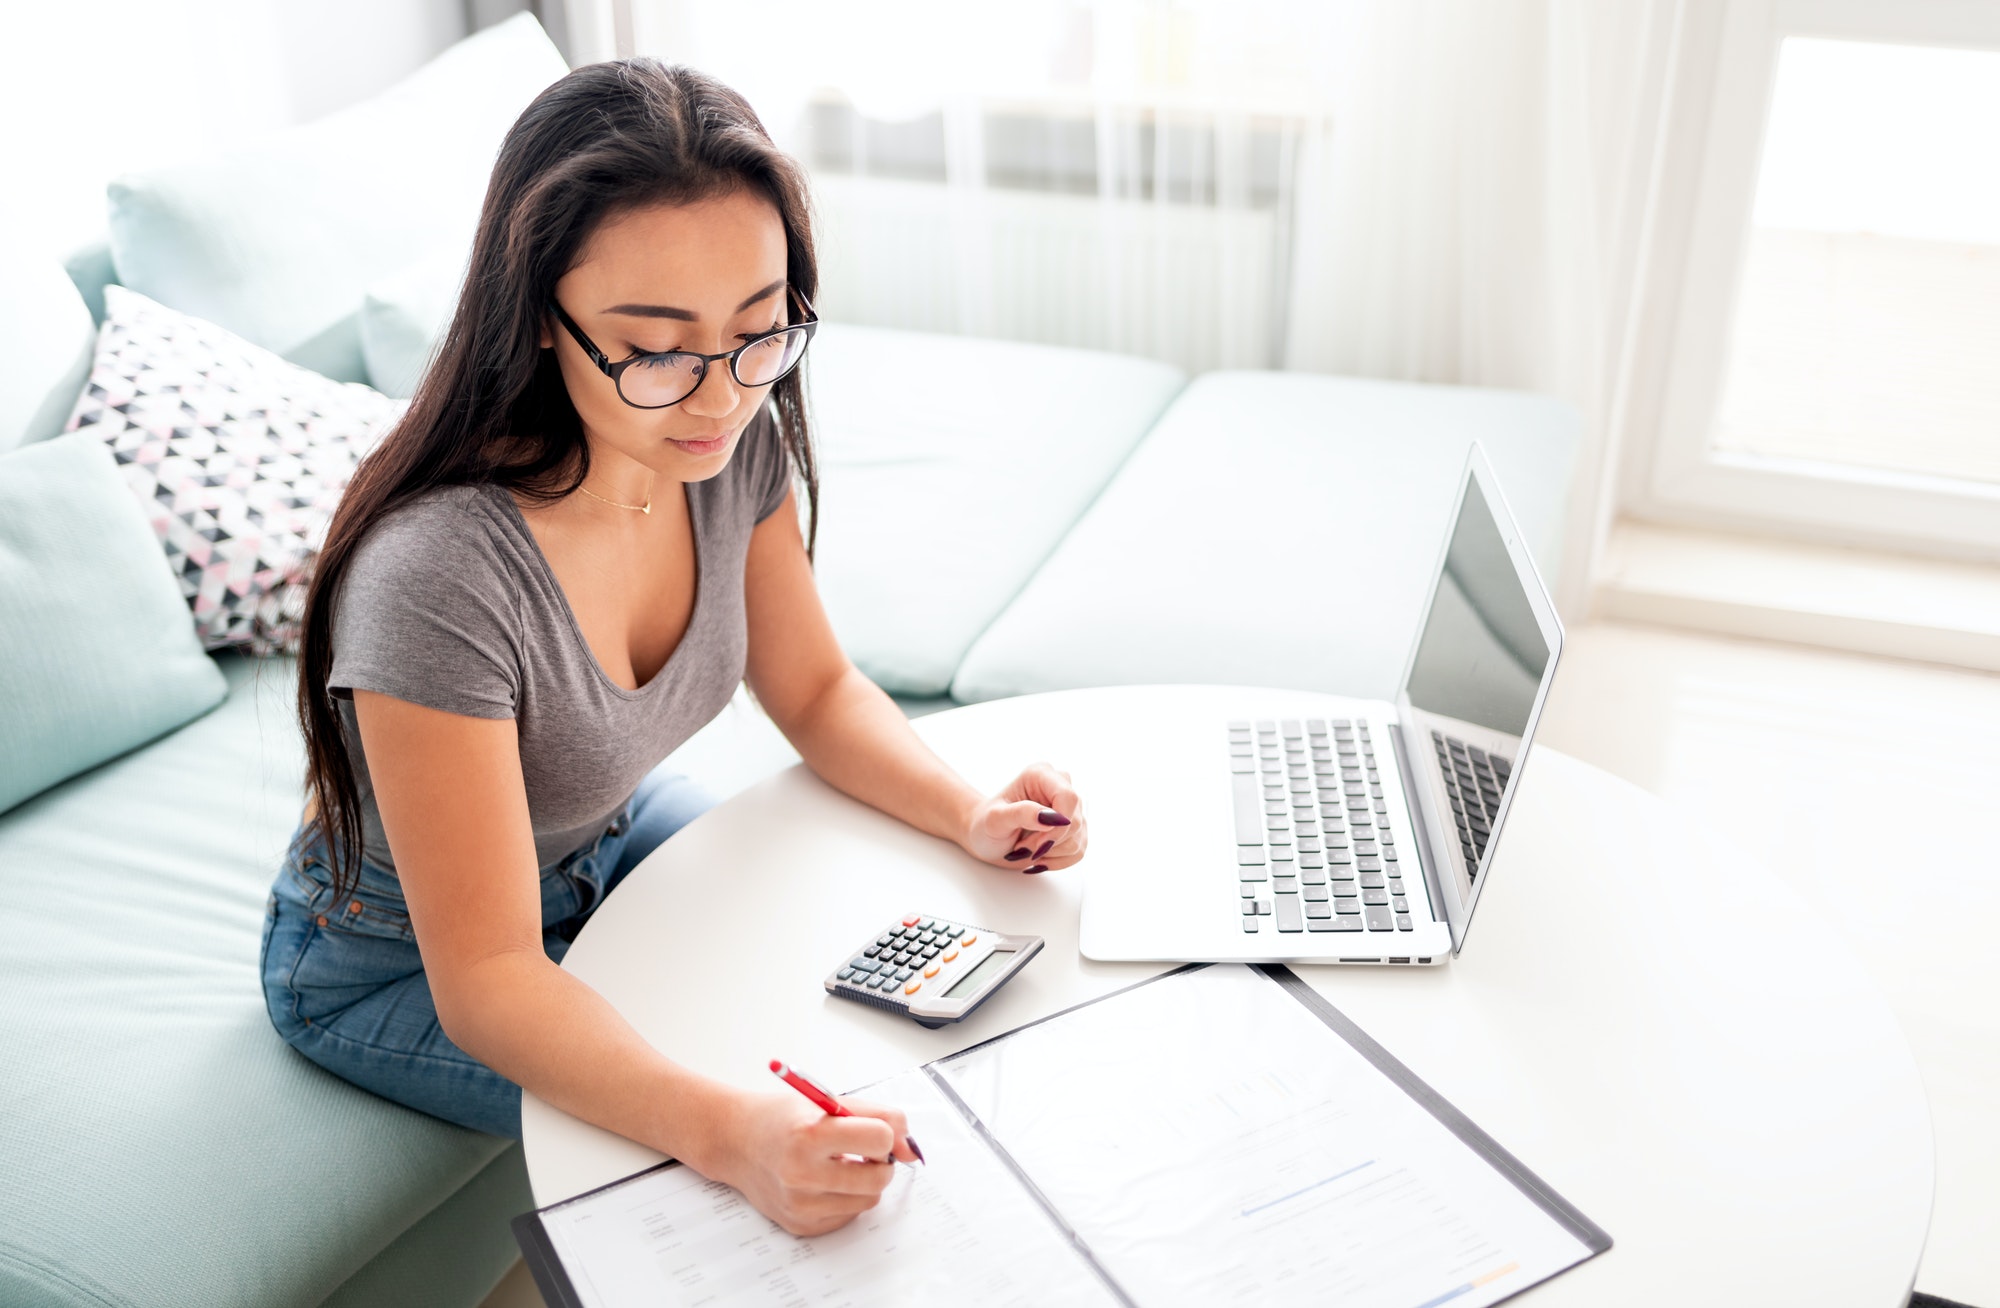 Asian woman using calculator and laptop for calaulating home budget finance taxes